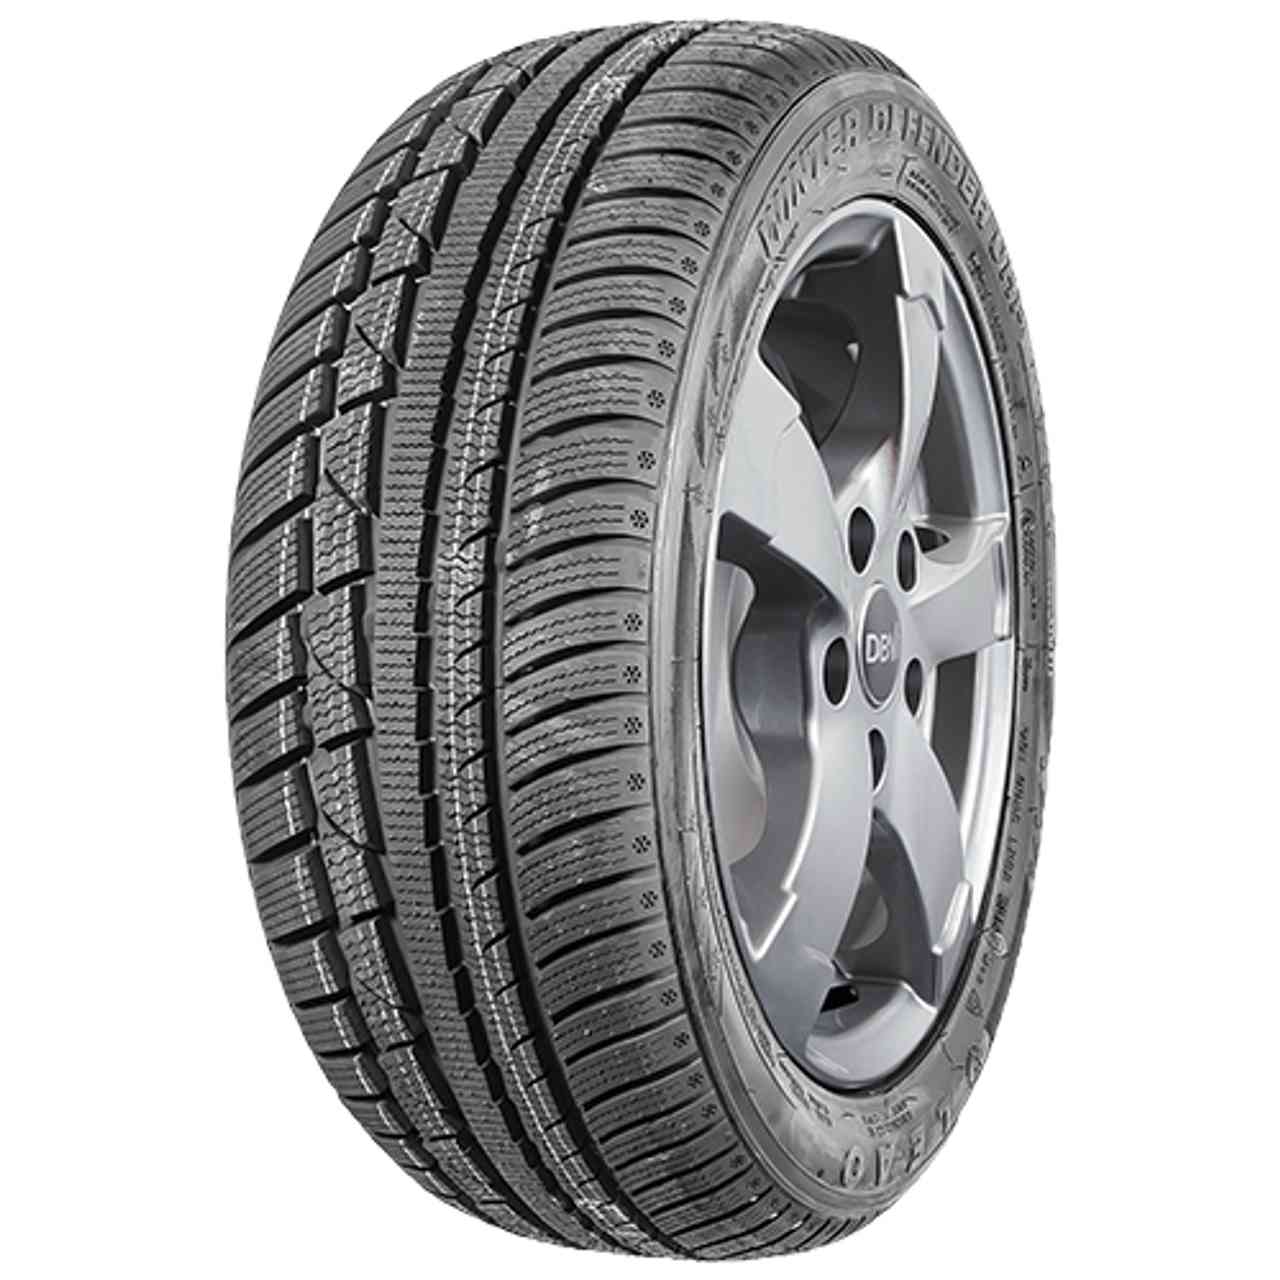 LEAO WINTER DEFENDER UHP 235/45R18 98V BSW